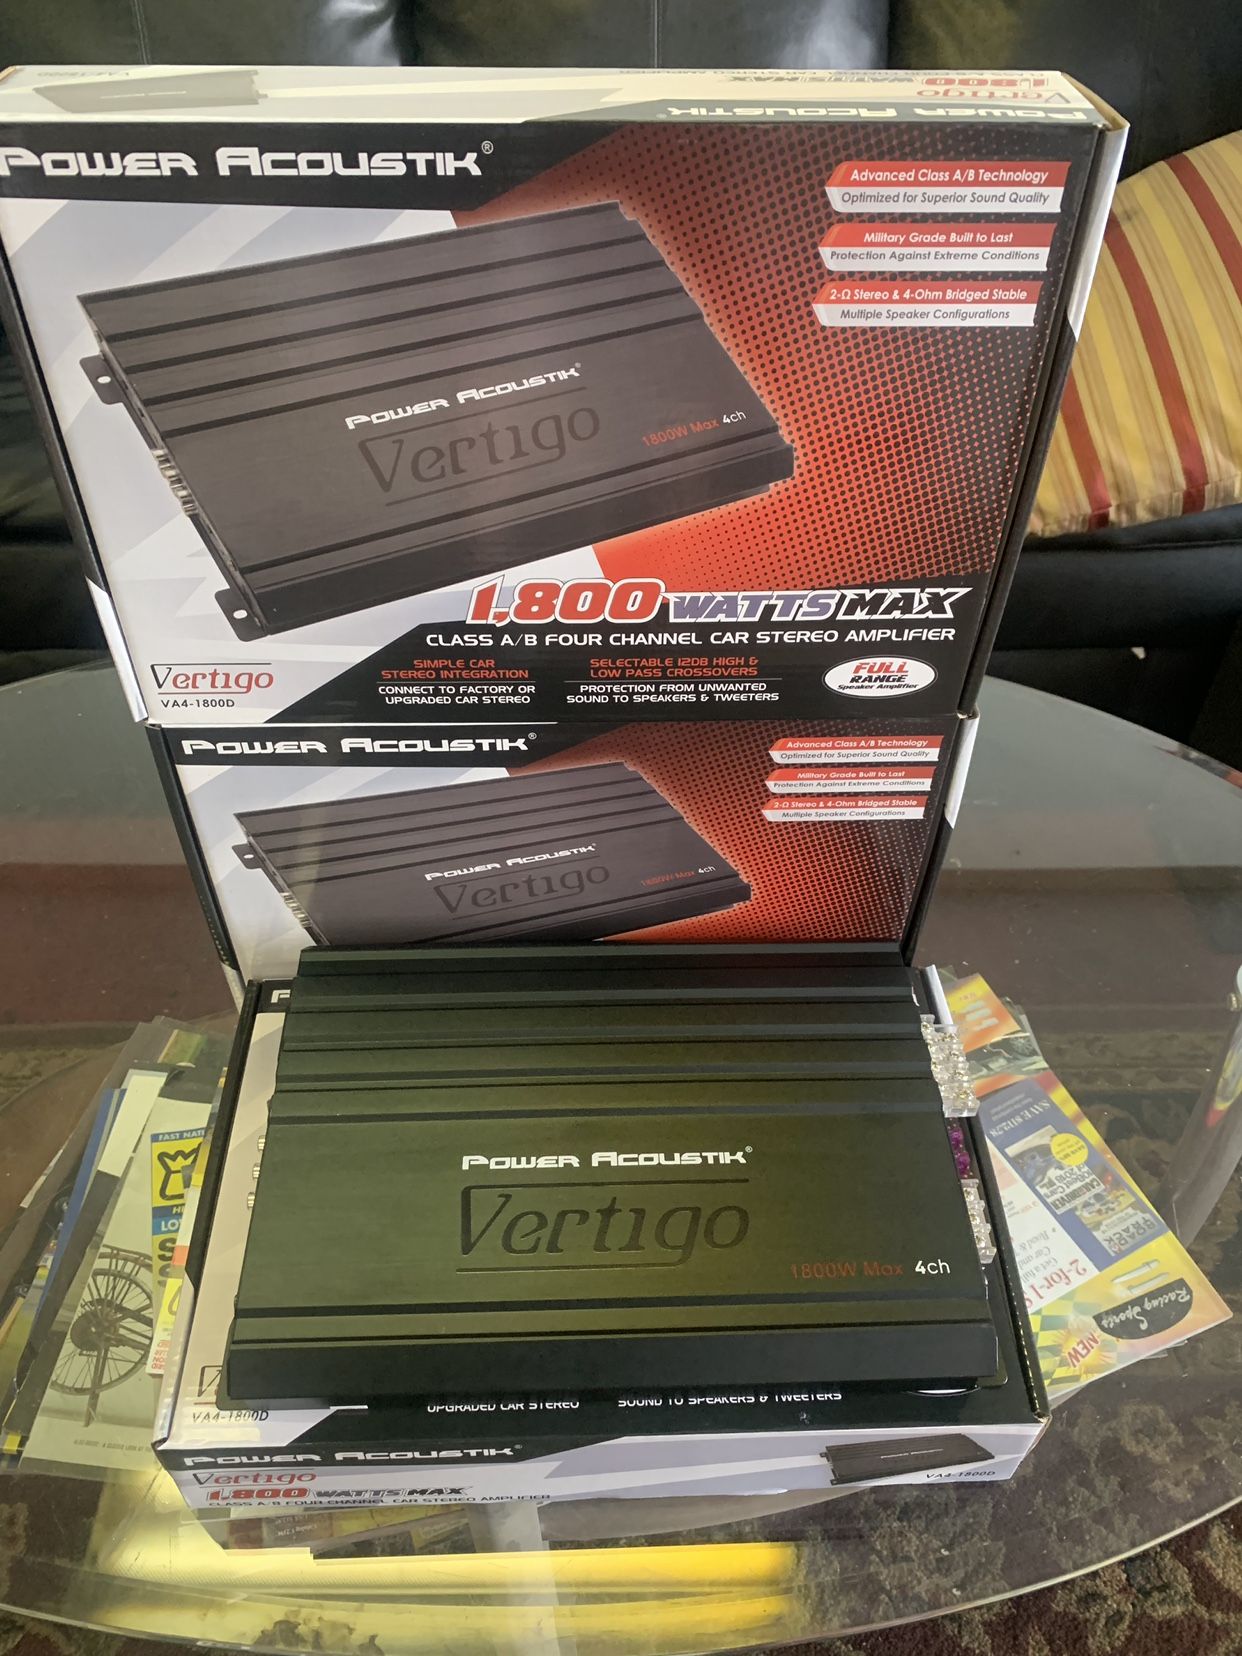 Power Acoustic Car Audio 1800 Watt Car Stereo Amplifier . 4 Channel . New Years Super Sale . $69 While They Last New